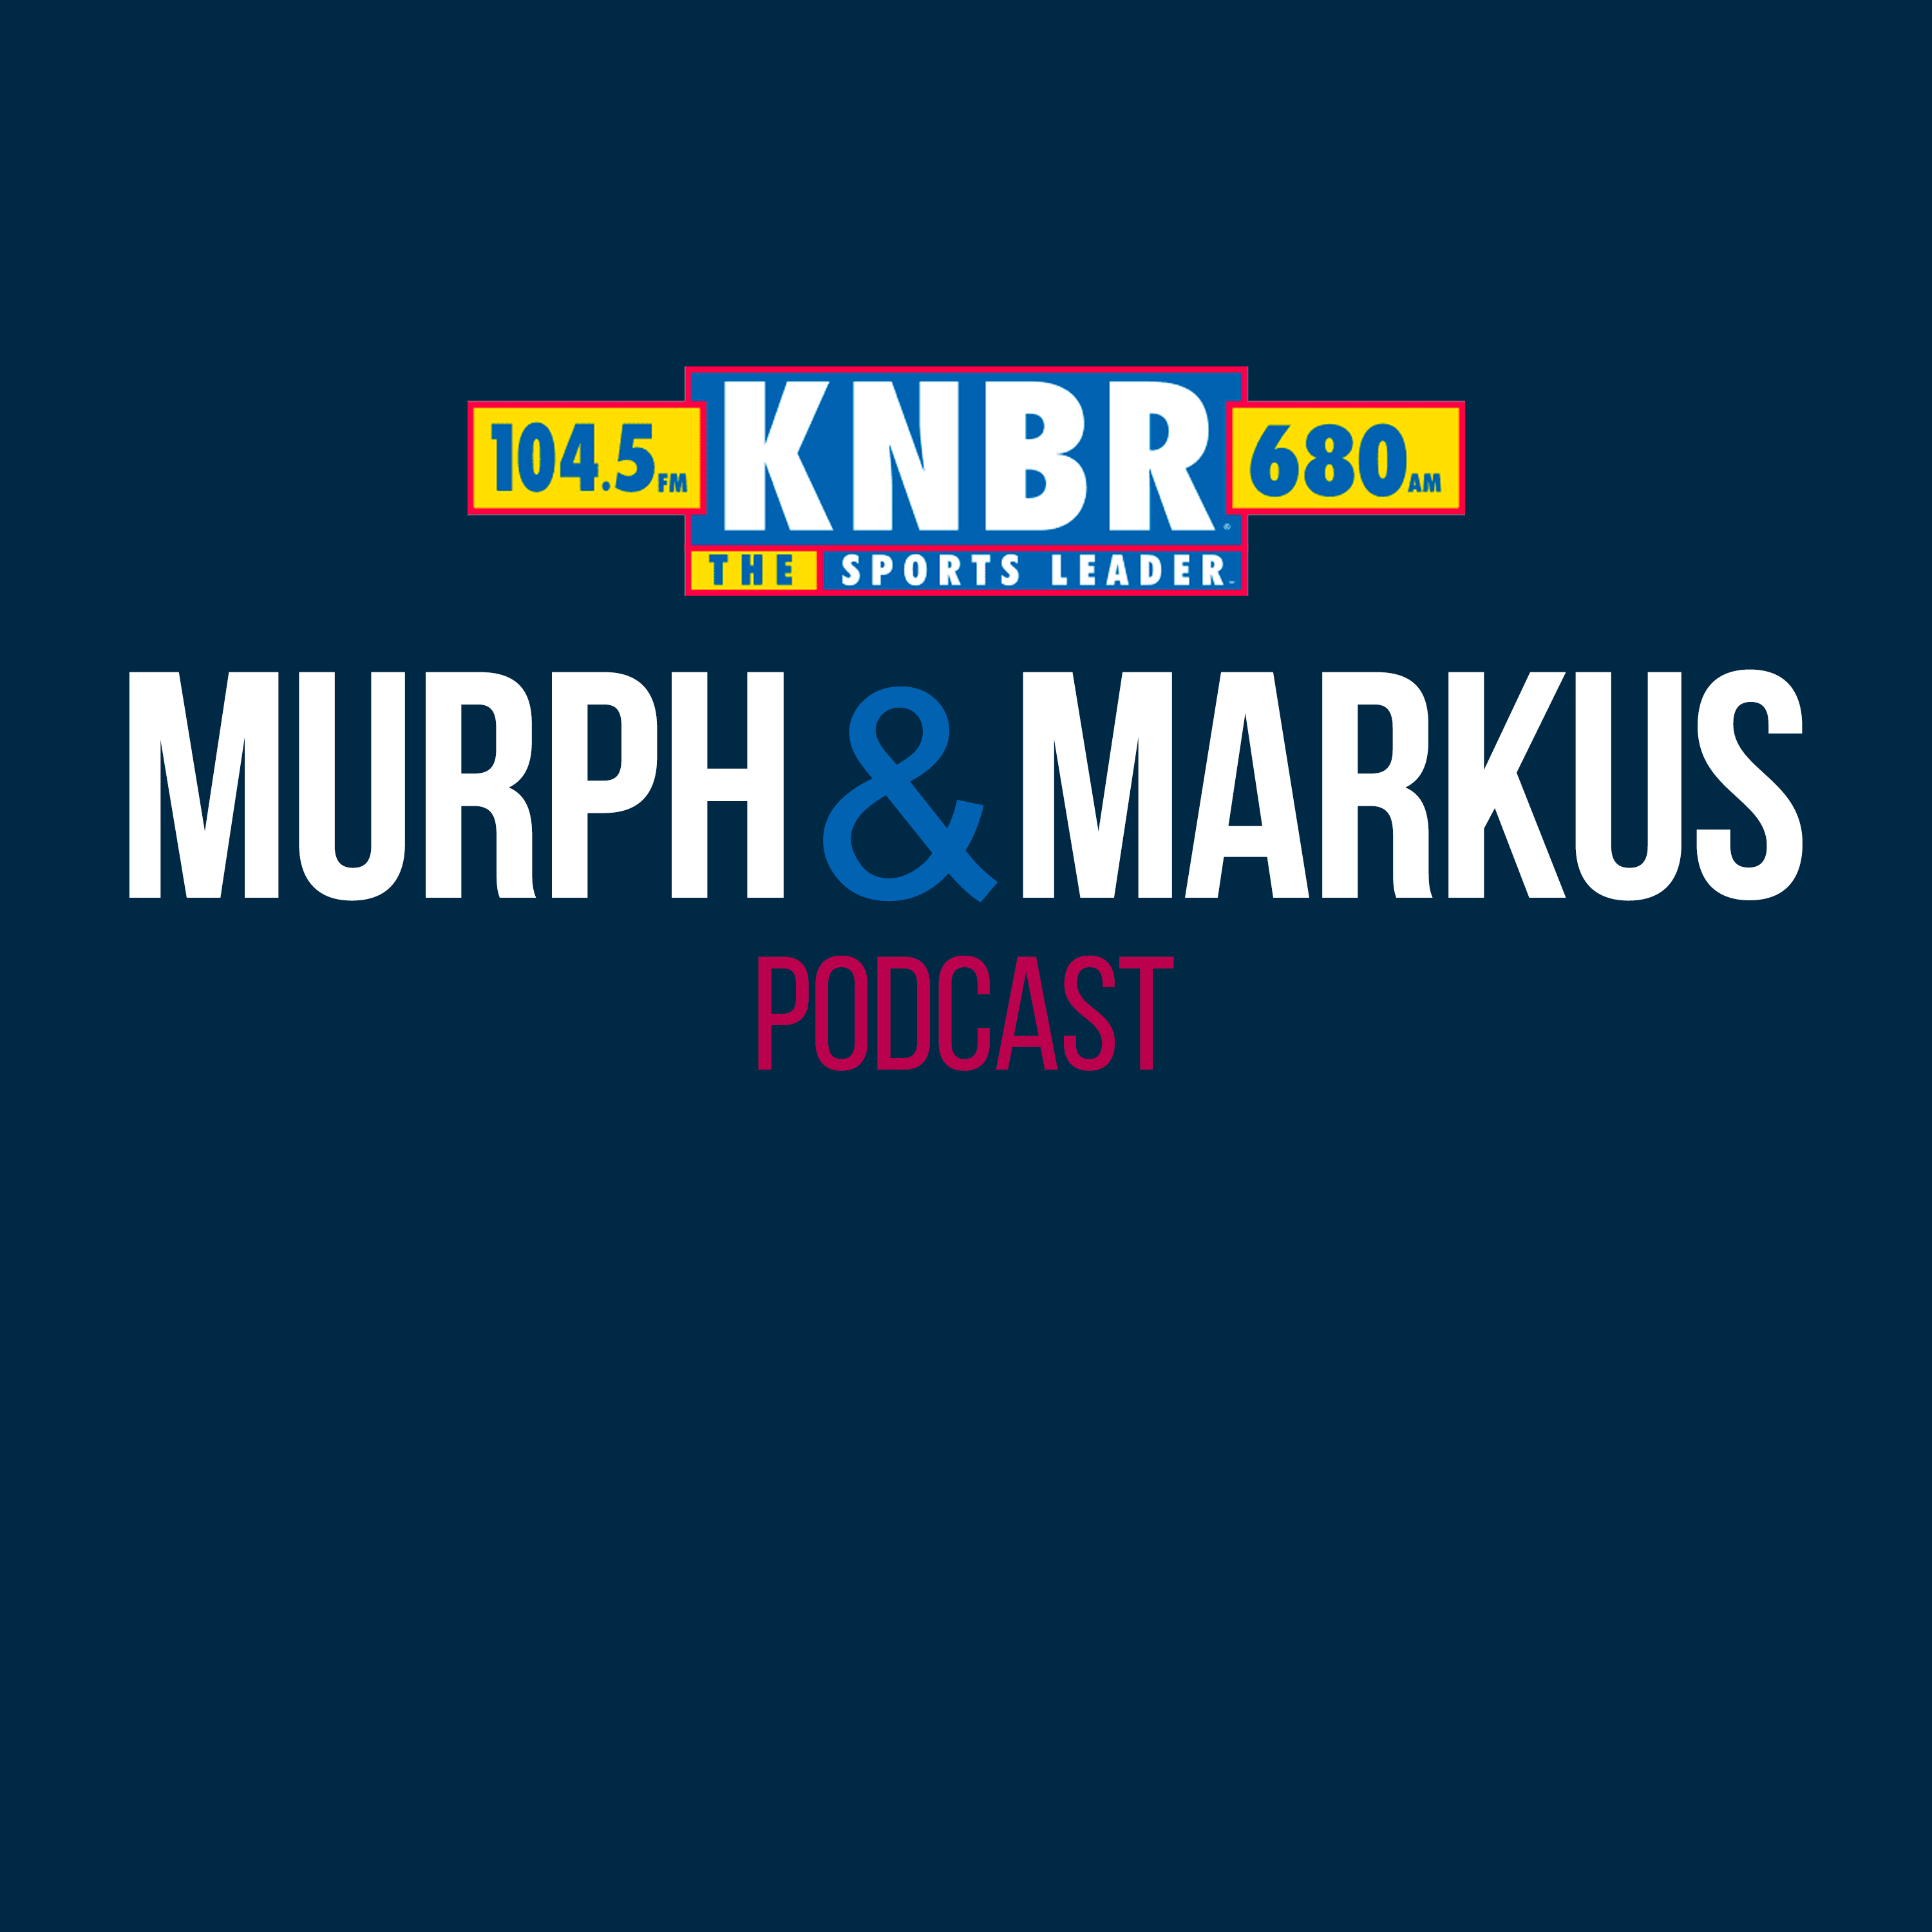 5-23 Hour 3: Murph & Markus dive into the Cooler of Content, close the show, & talk to Joe Ritzo during Giants pregame